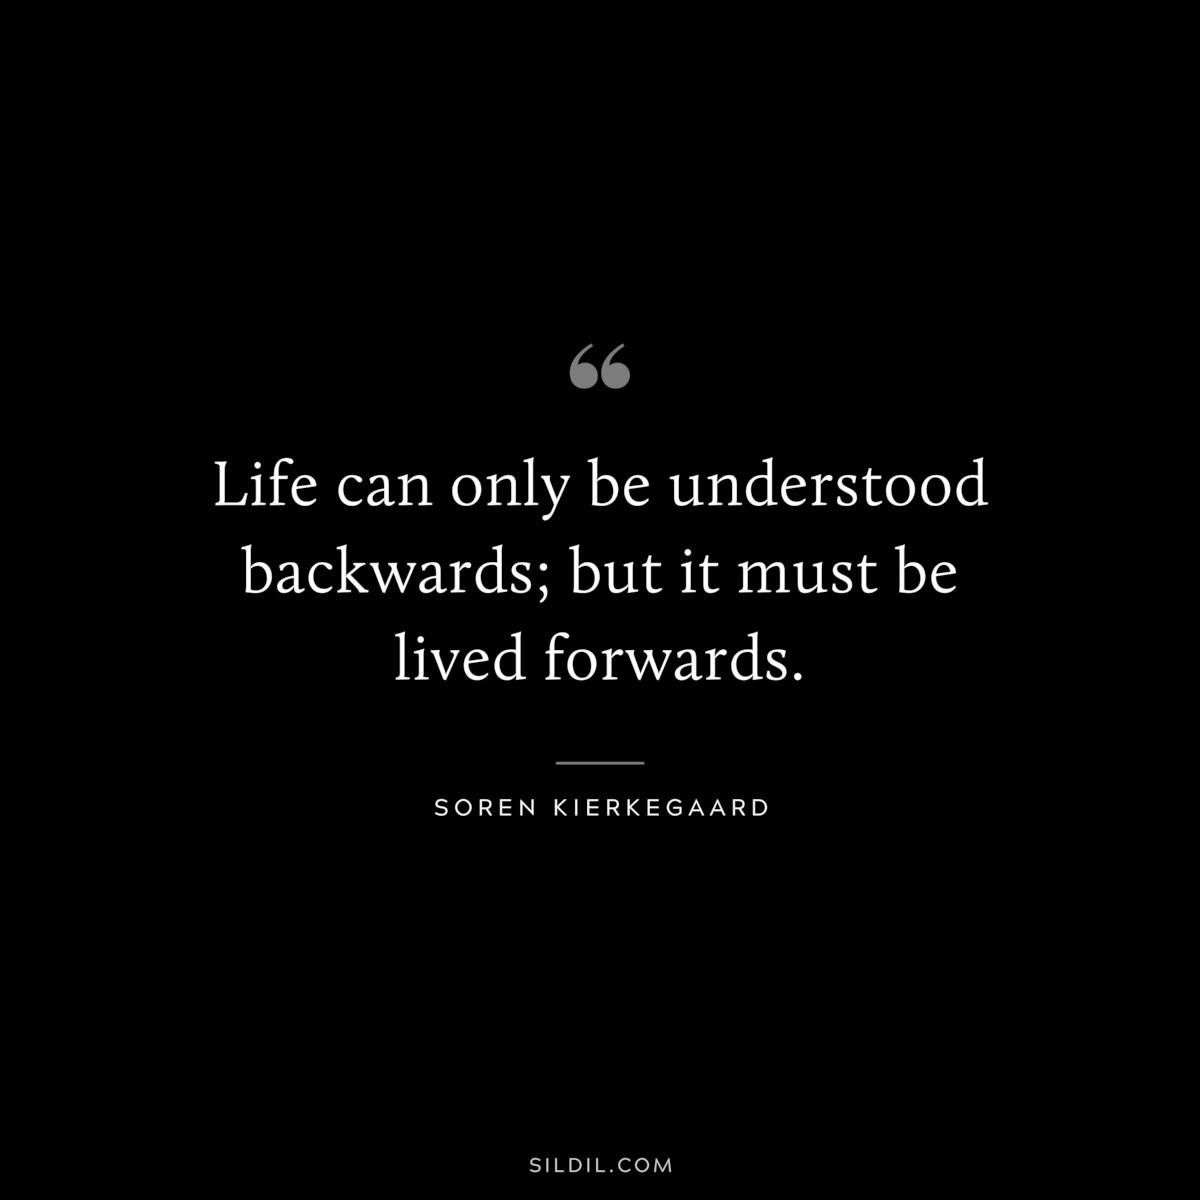 Life can only be understood backwards; but it must be lived forwards. ― Soren Kierkegaard